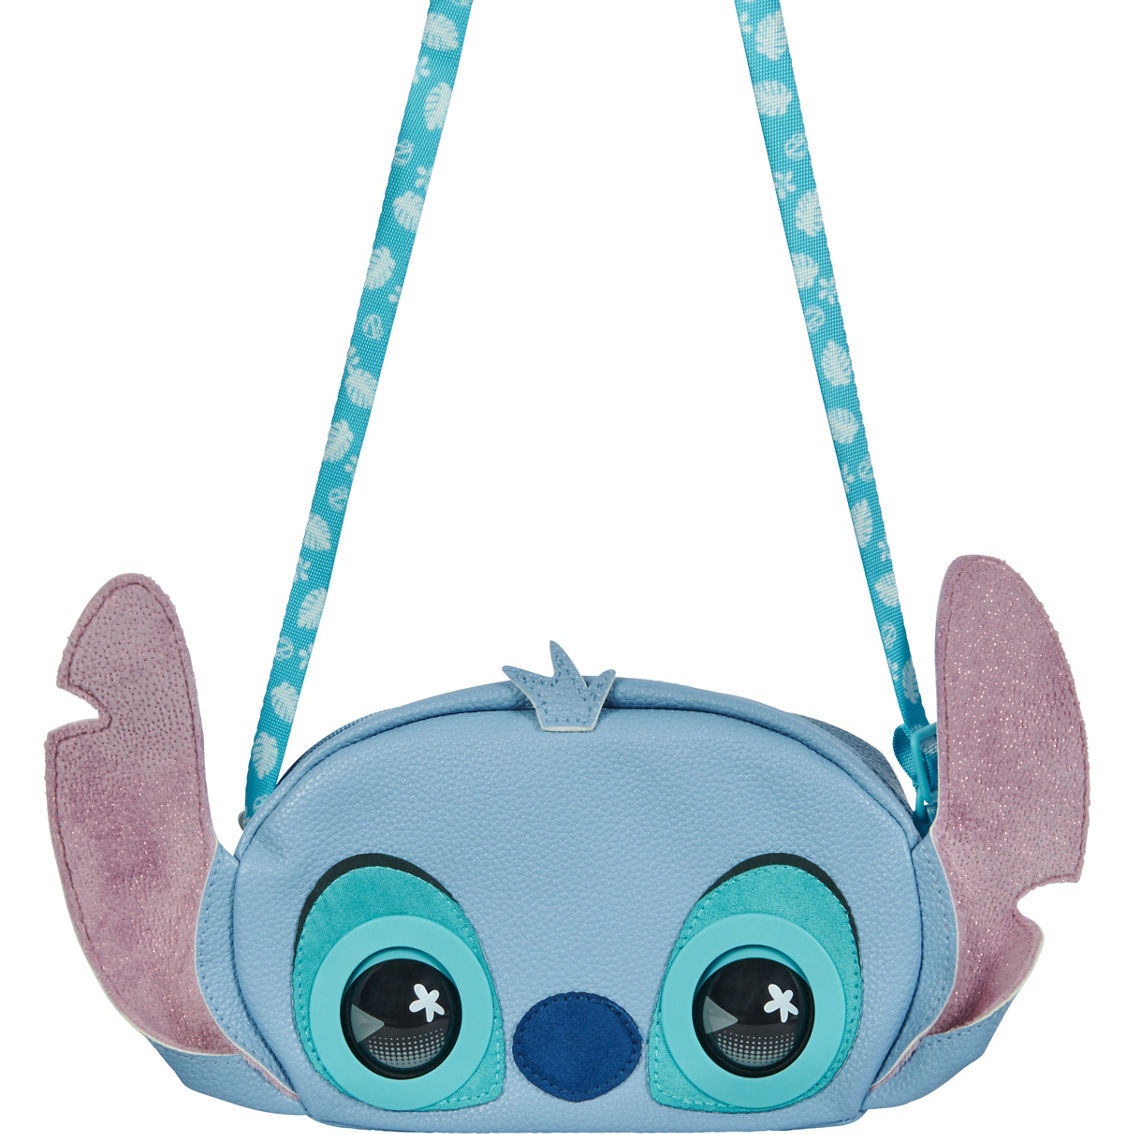 Spin Master Purse Pets Disney Interactive Stitch - Image 3 of 5